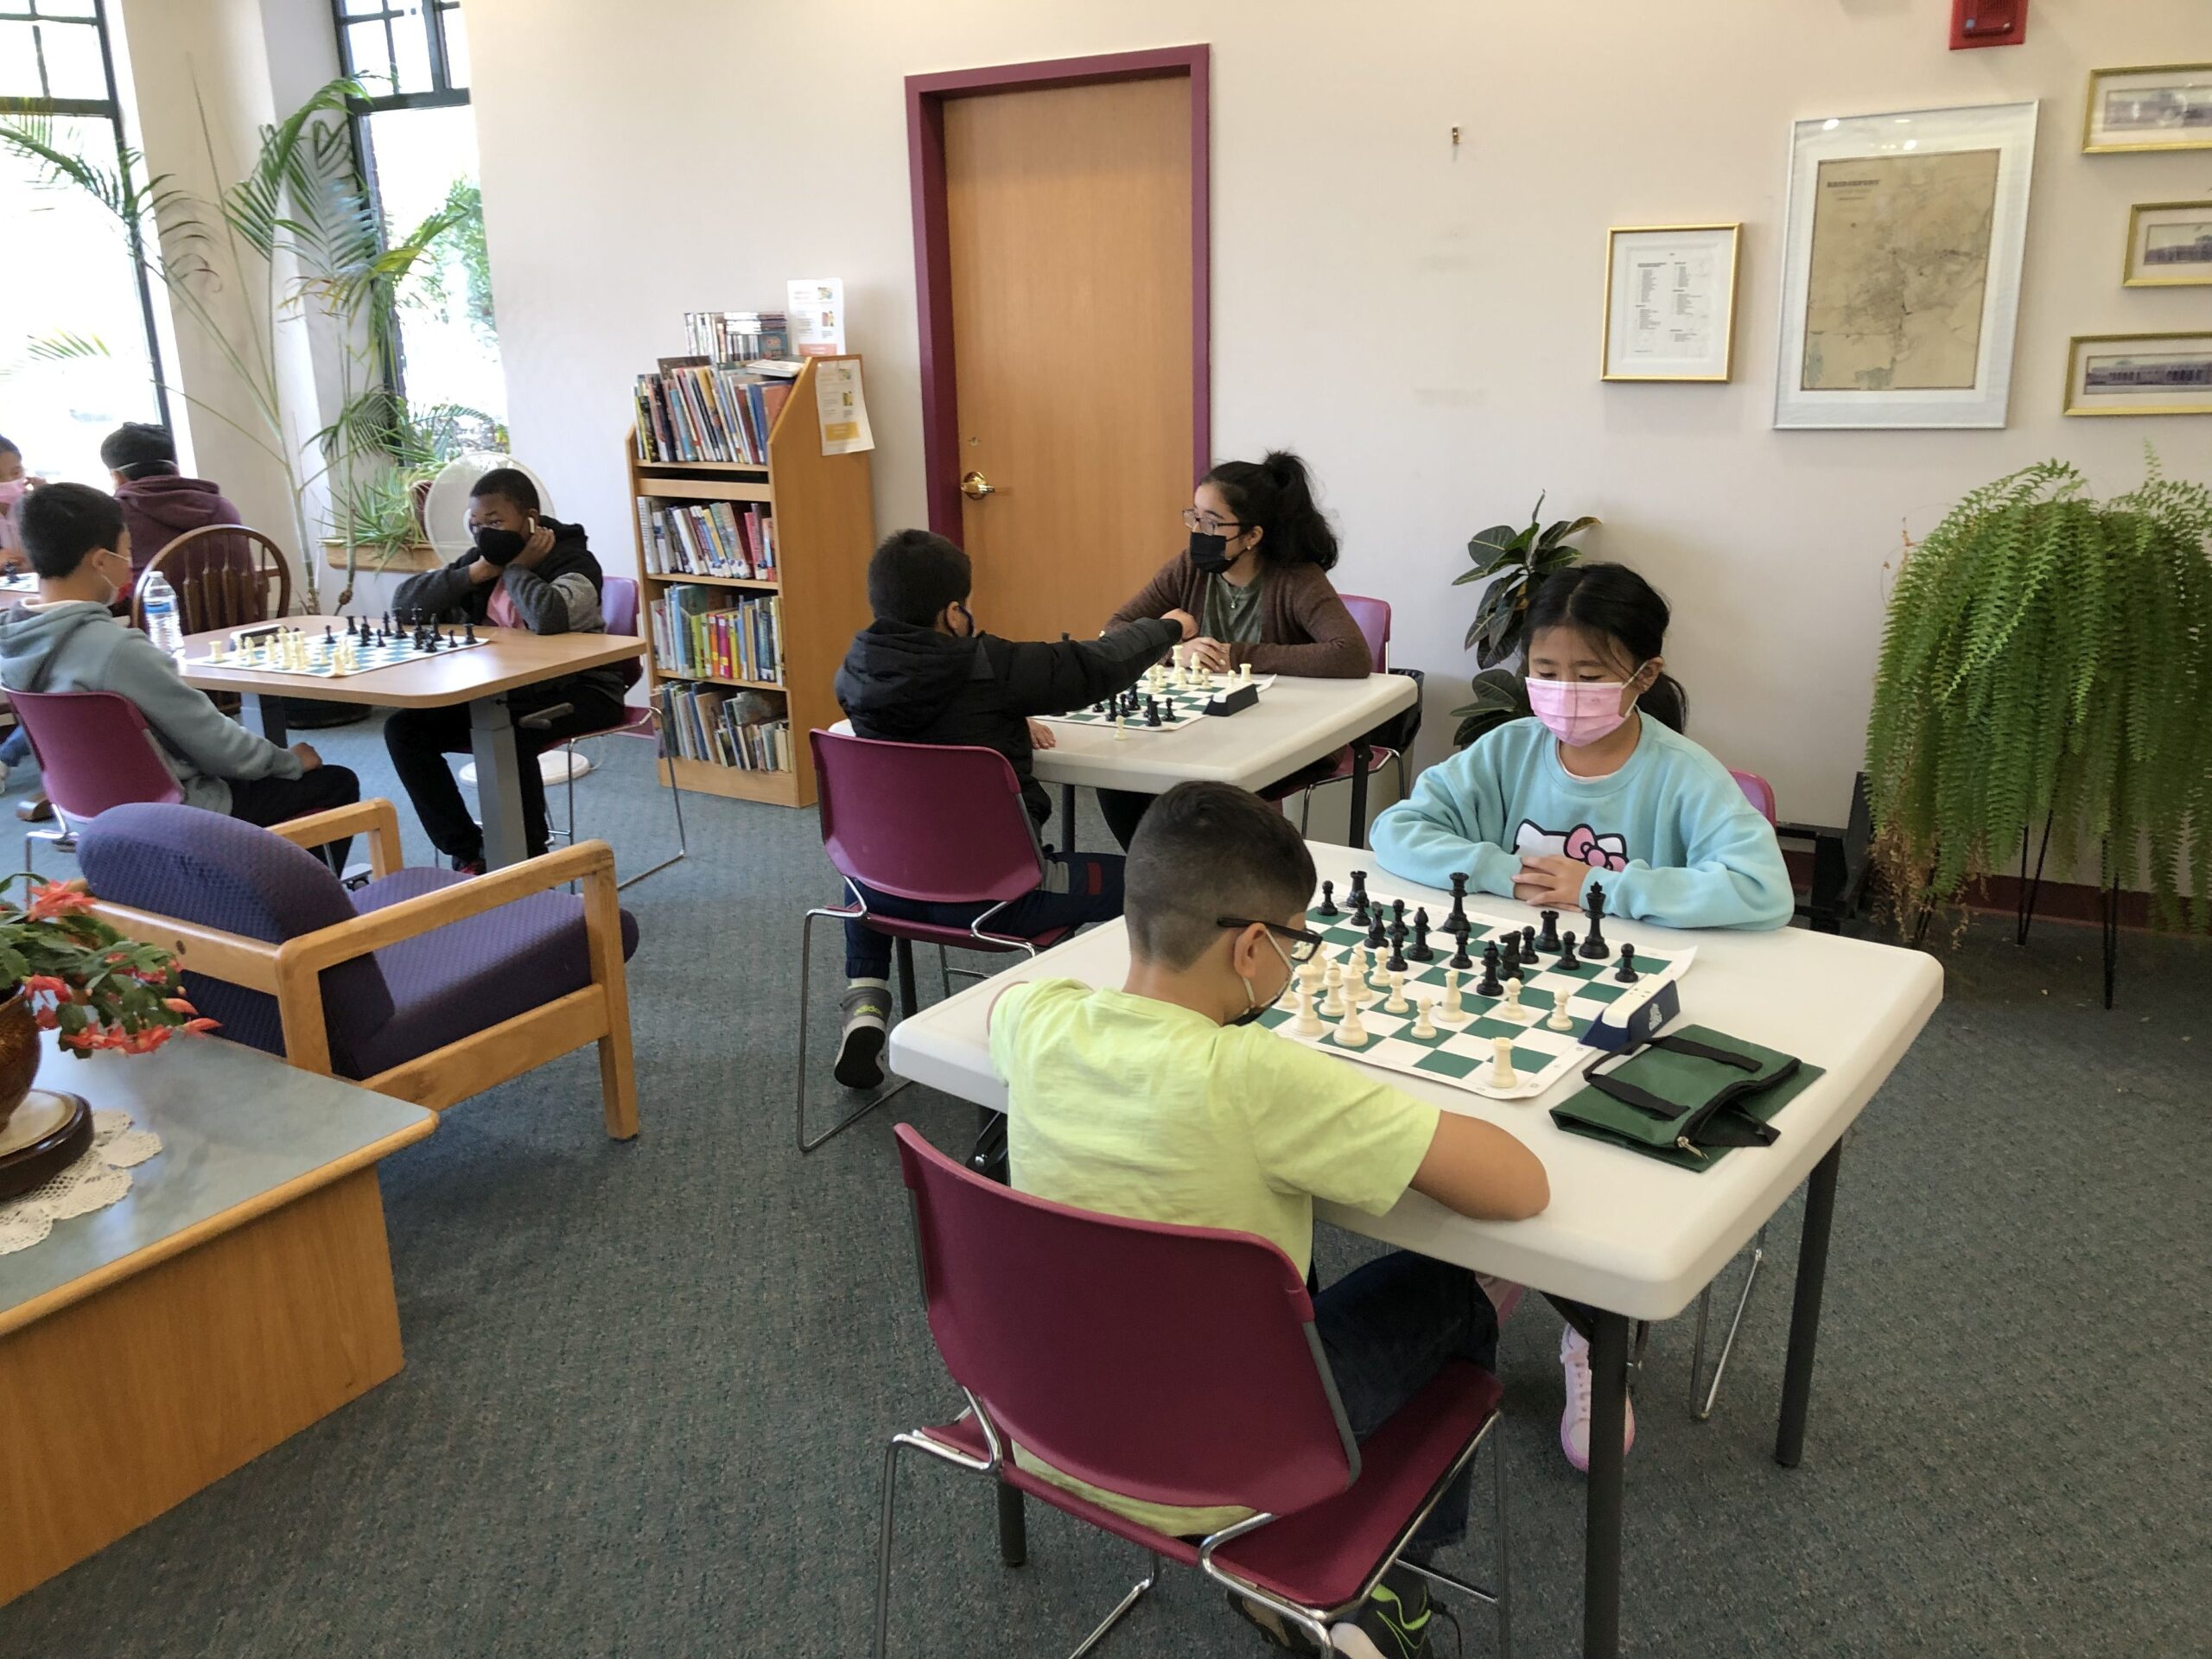 SPRING BREAK CHESS (and more) CAMP!